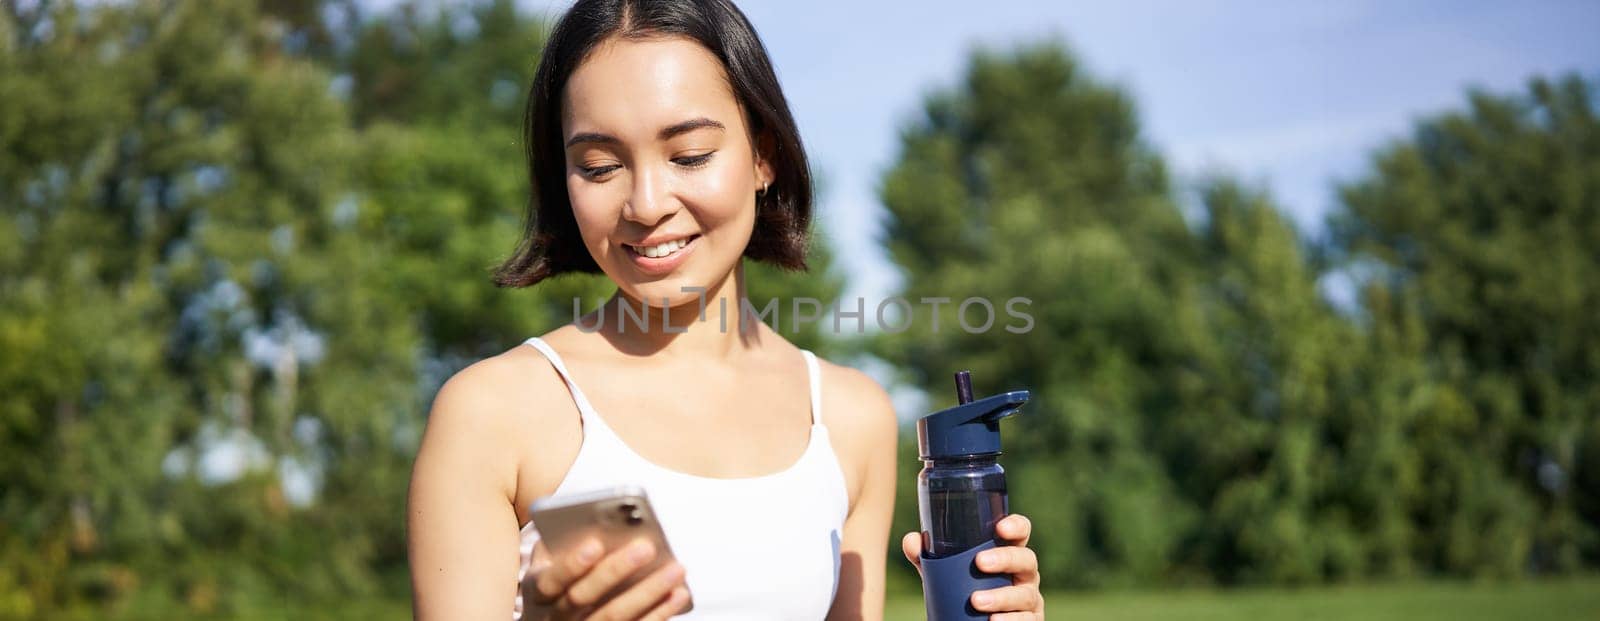 Smiling fitness girl drinks water, checks her app on smartphone and looks happy, stays hydrated on fresh air, sunny day in park.